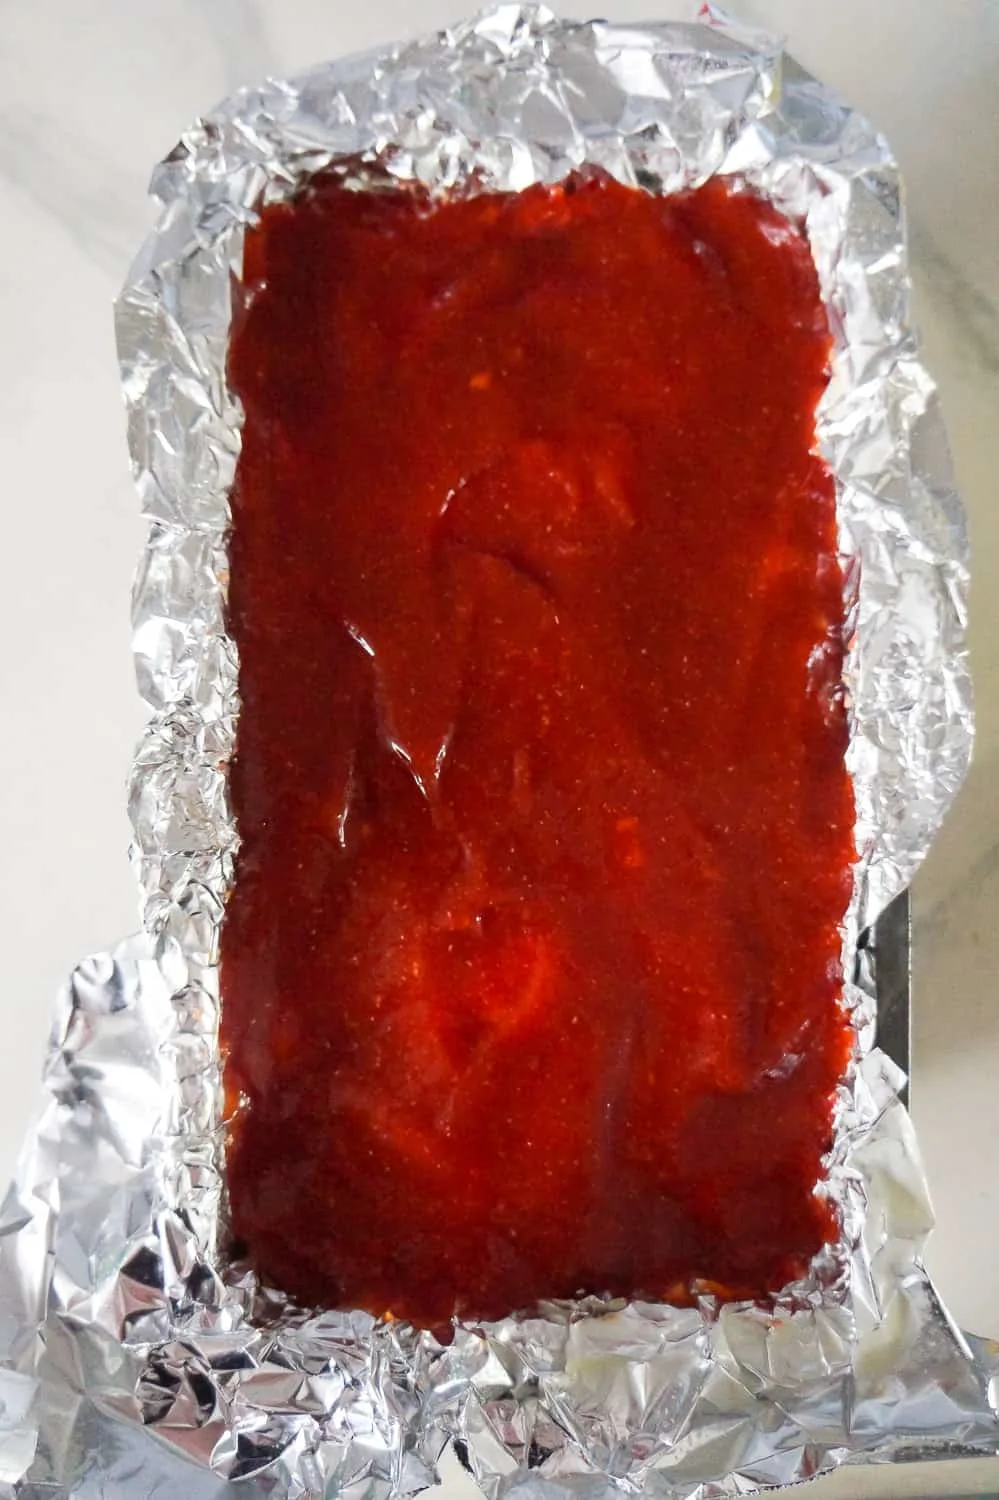 meatloaf with ketchup and brown sugar sauce before baking